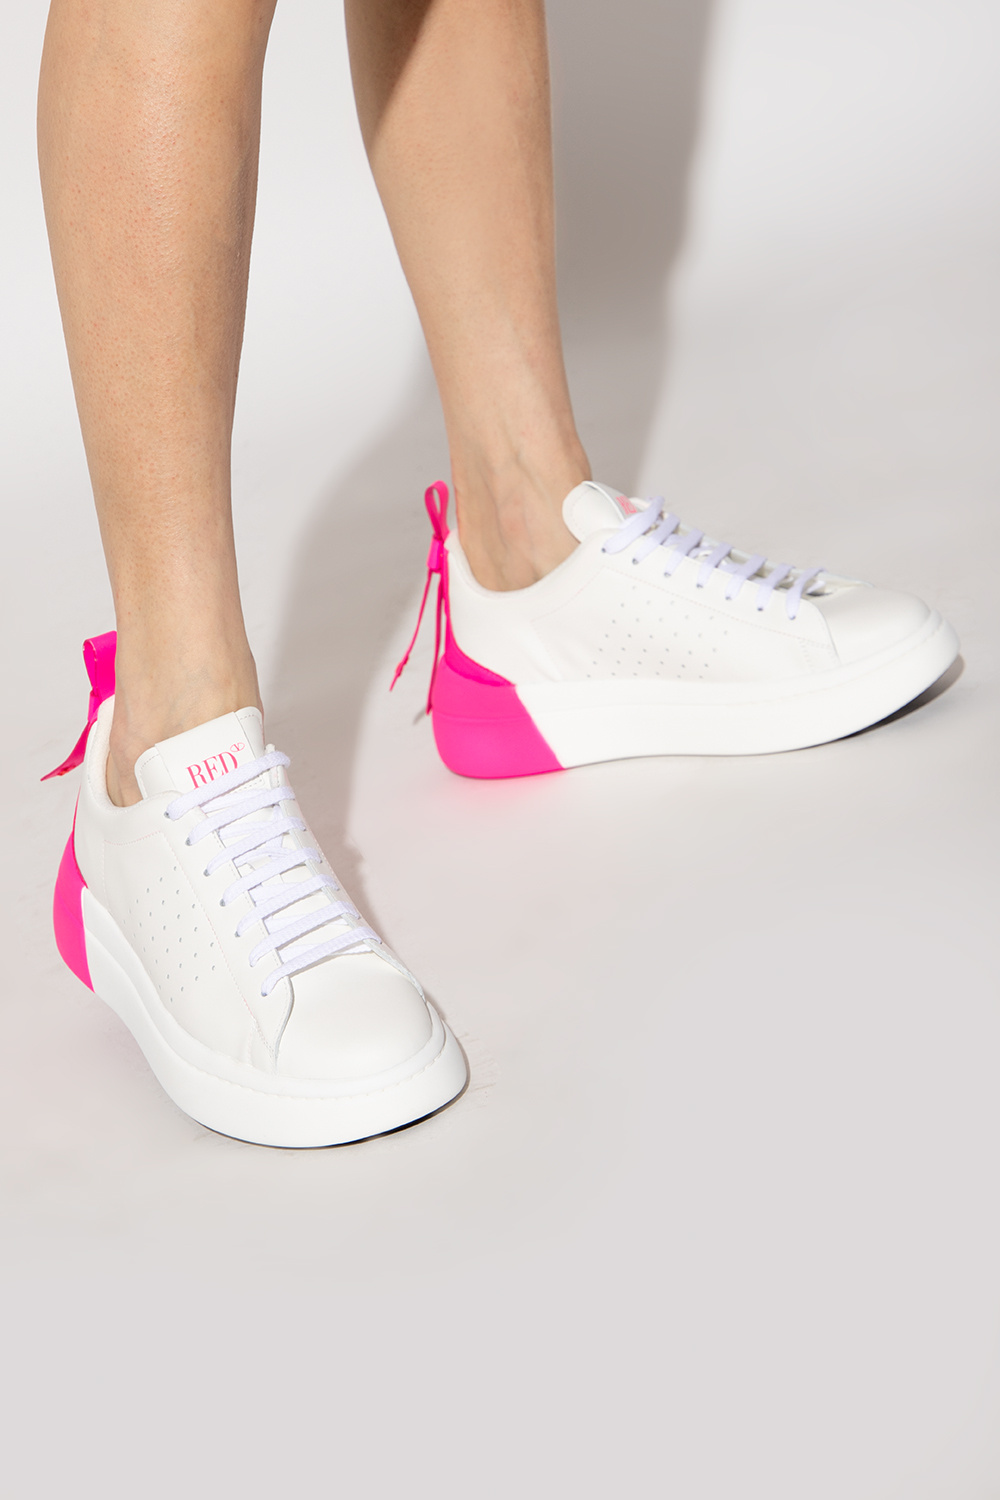 Red Valentino ‘Bowalk’ sneakers